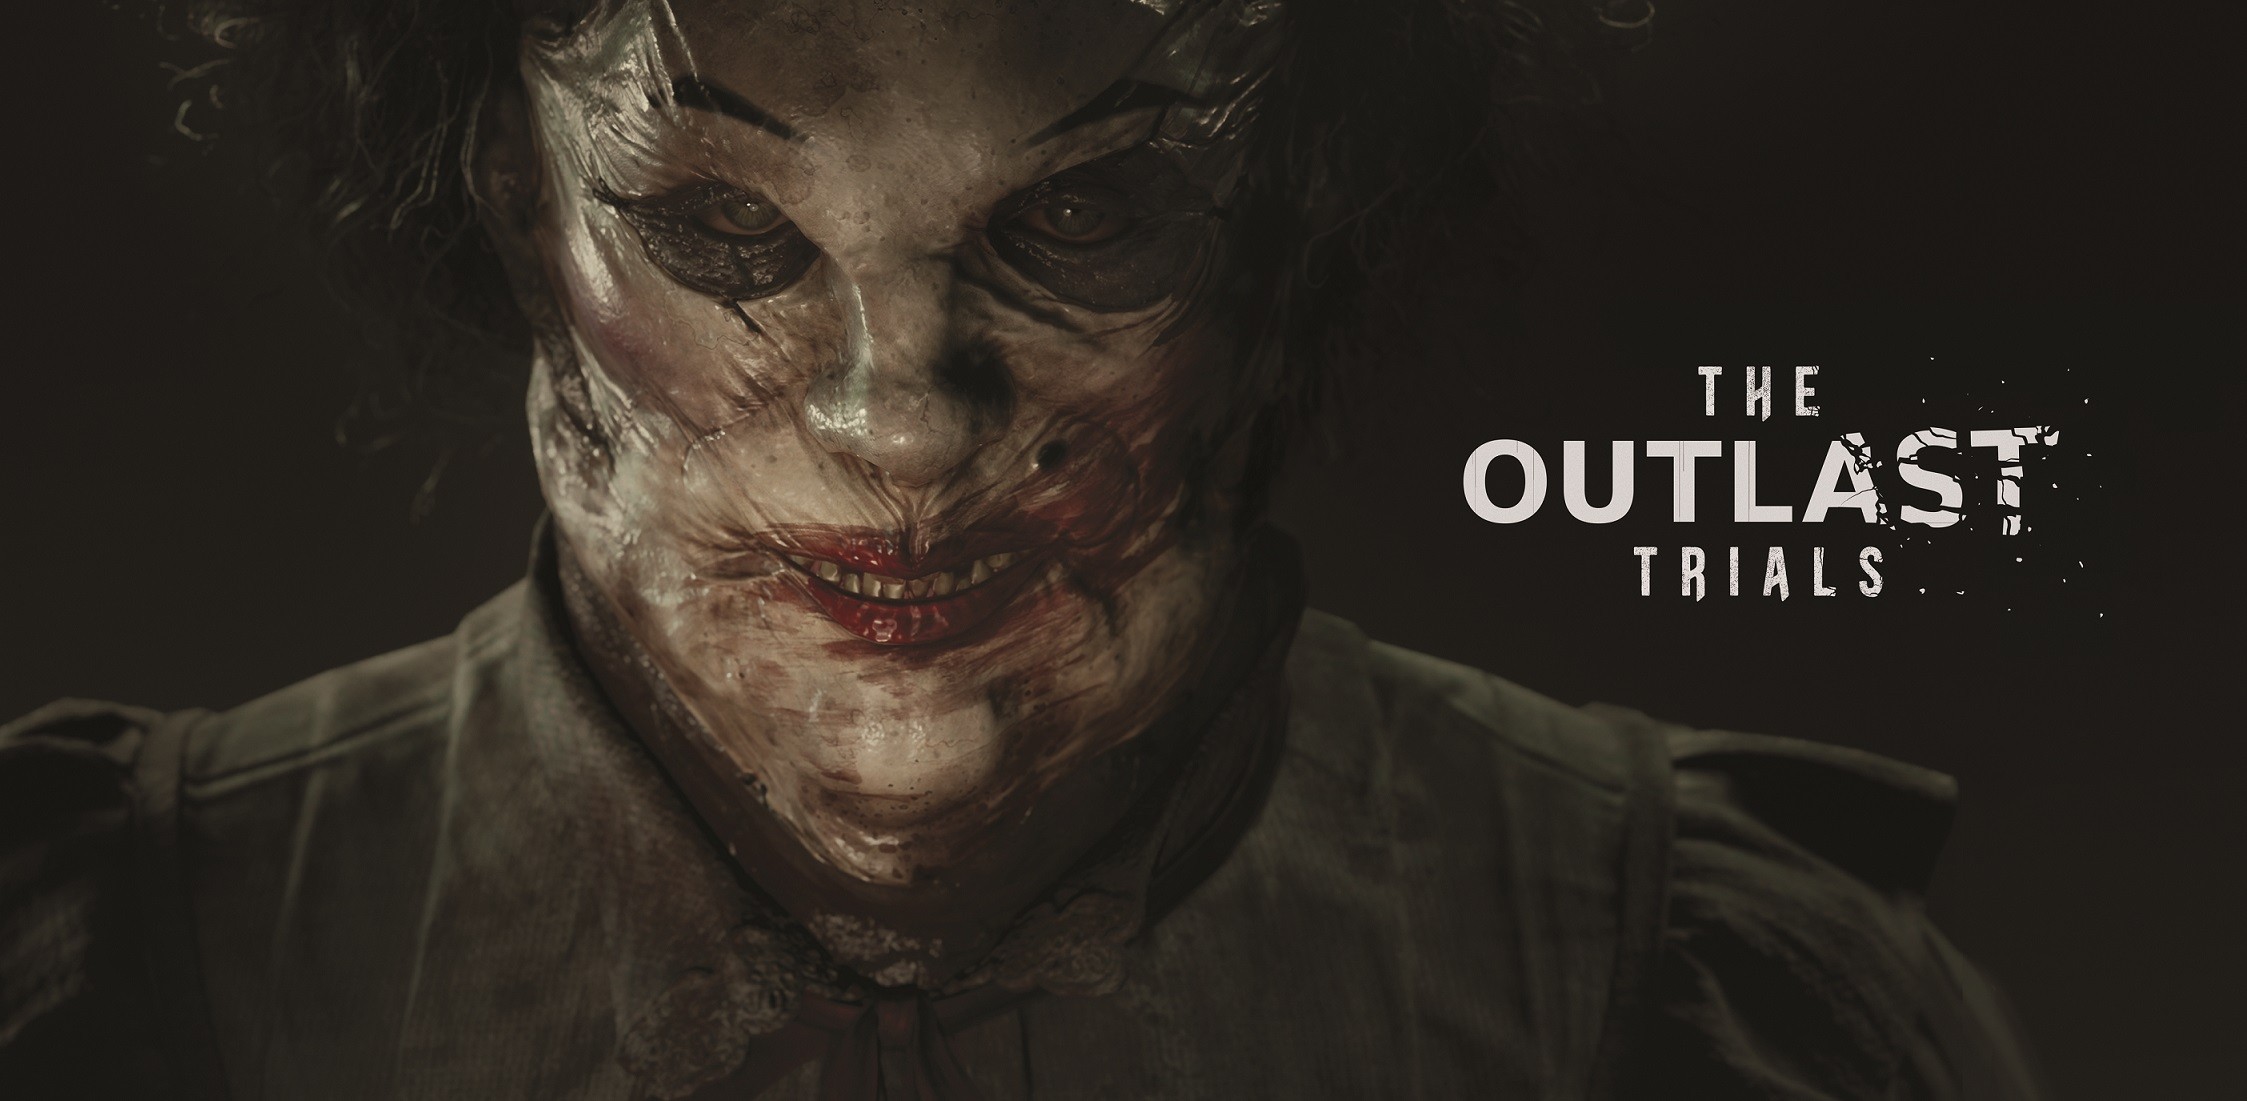 The Outlast Trials - Official Teaser Trailer 